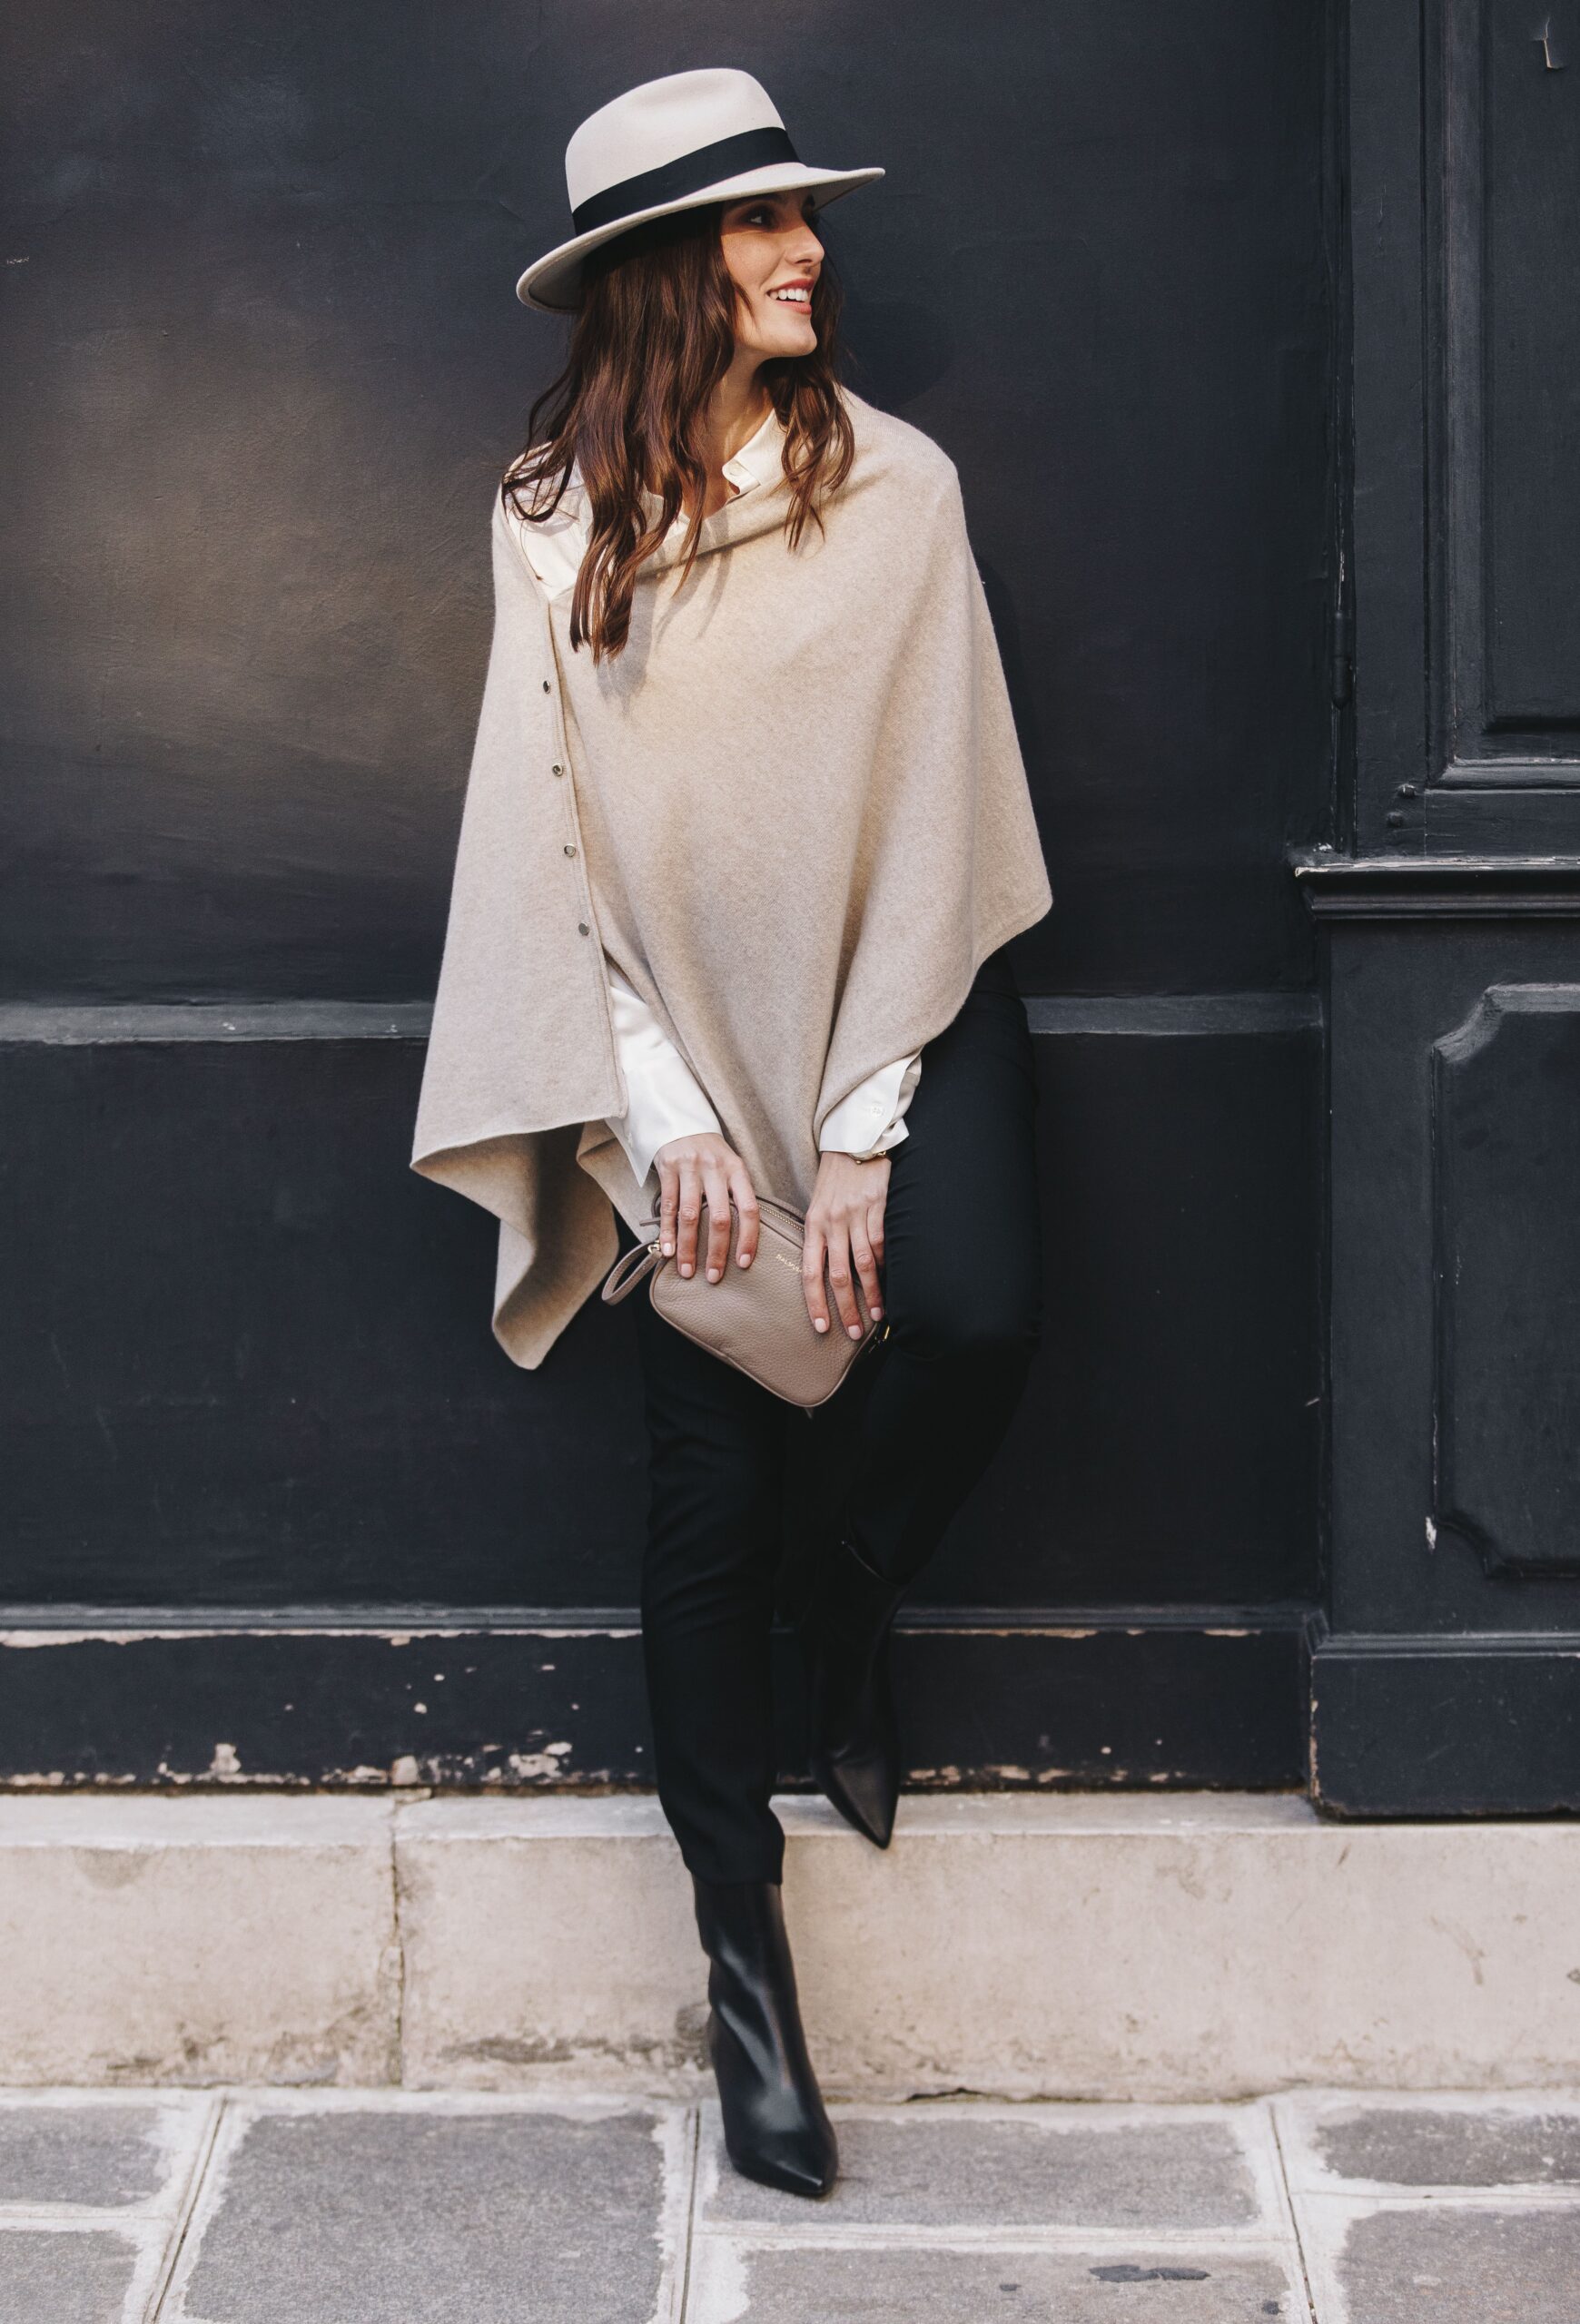 Luxurious Cashmere Ponchos Worth
Investing In